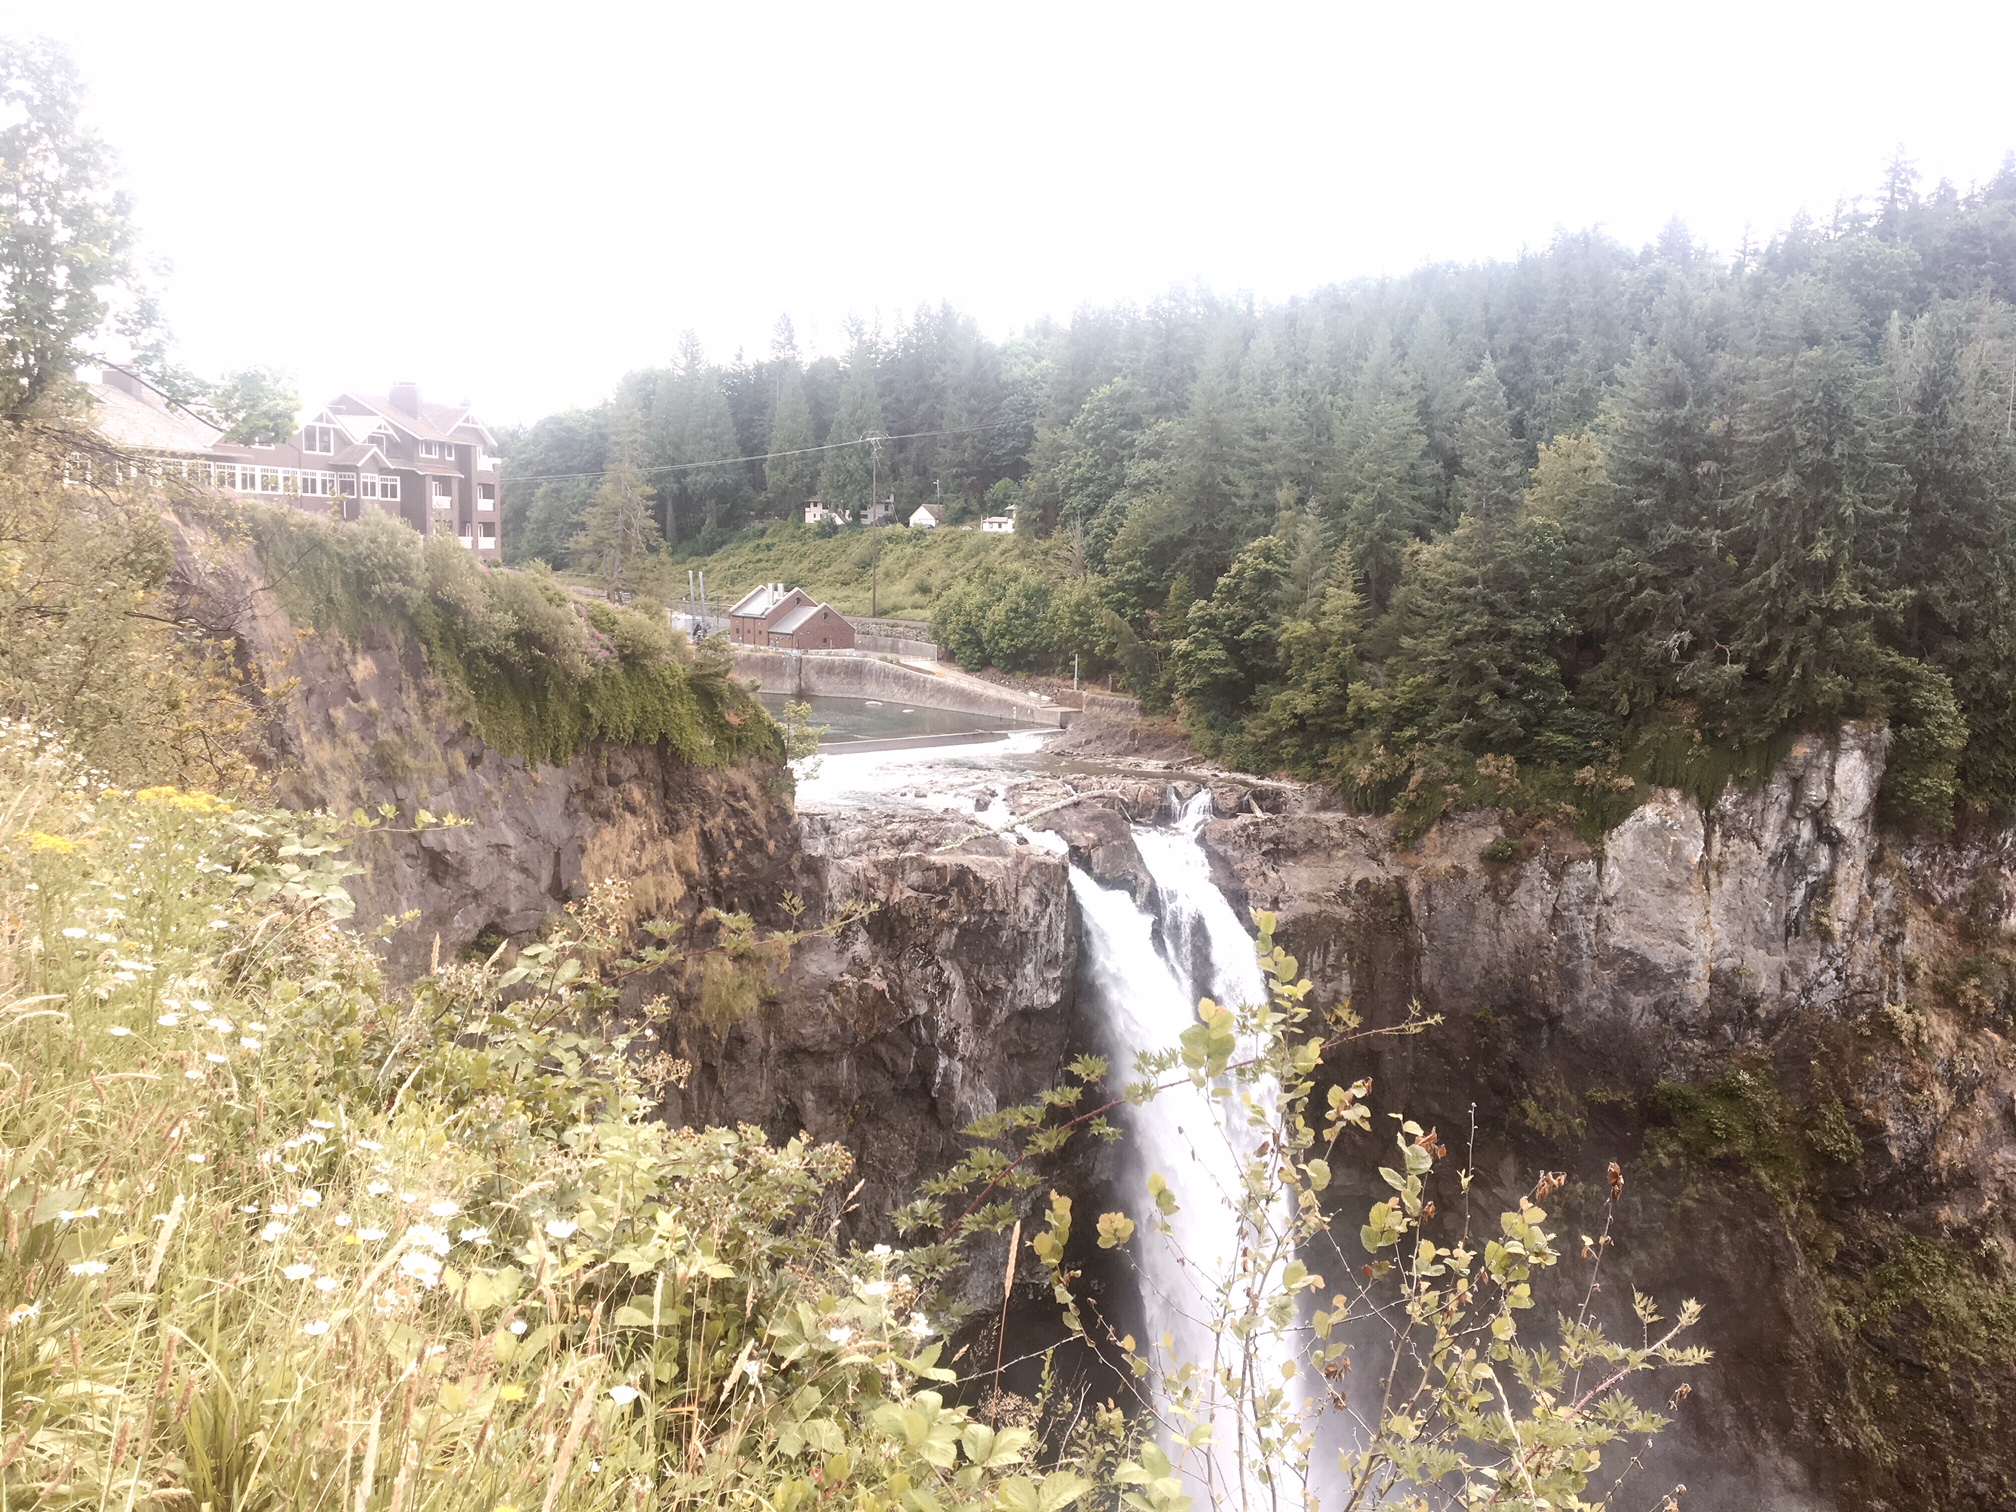 The Twin Peaks sign is back up in Snoqualmie Falls :)